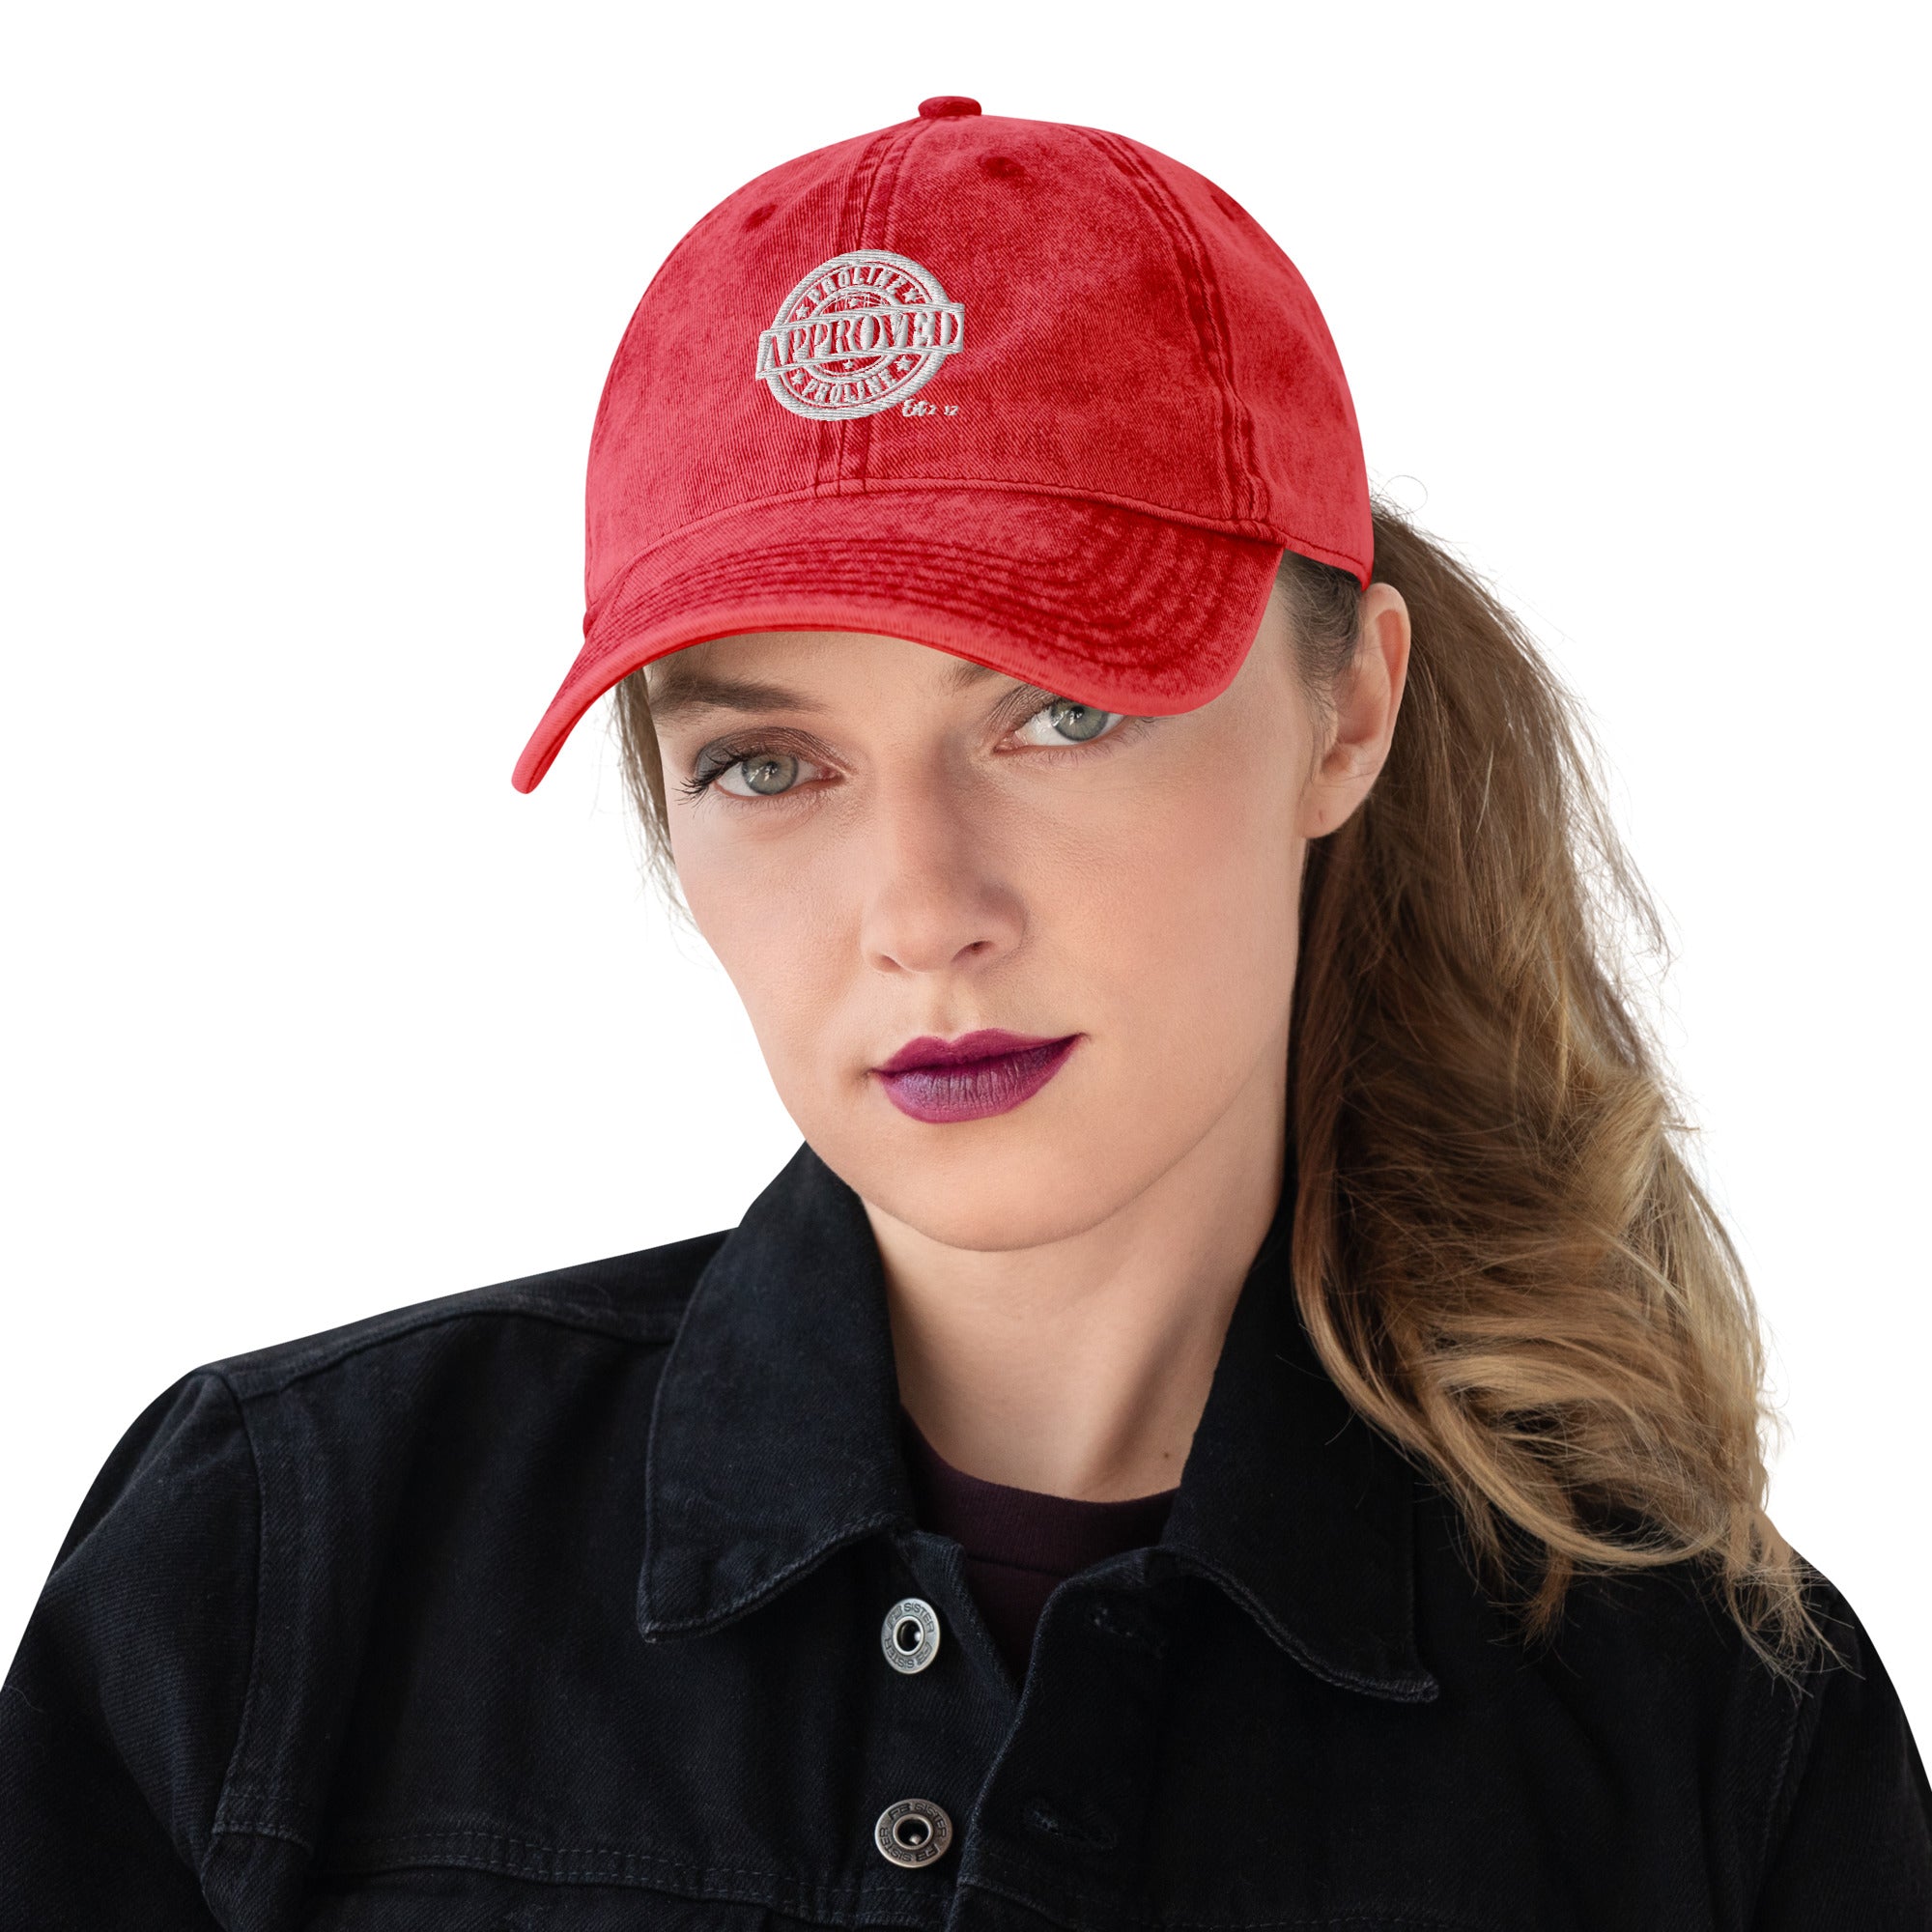 Proline Approved Vintage Cotton Twill Cap